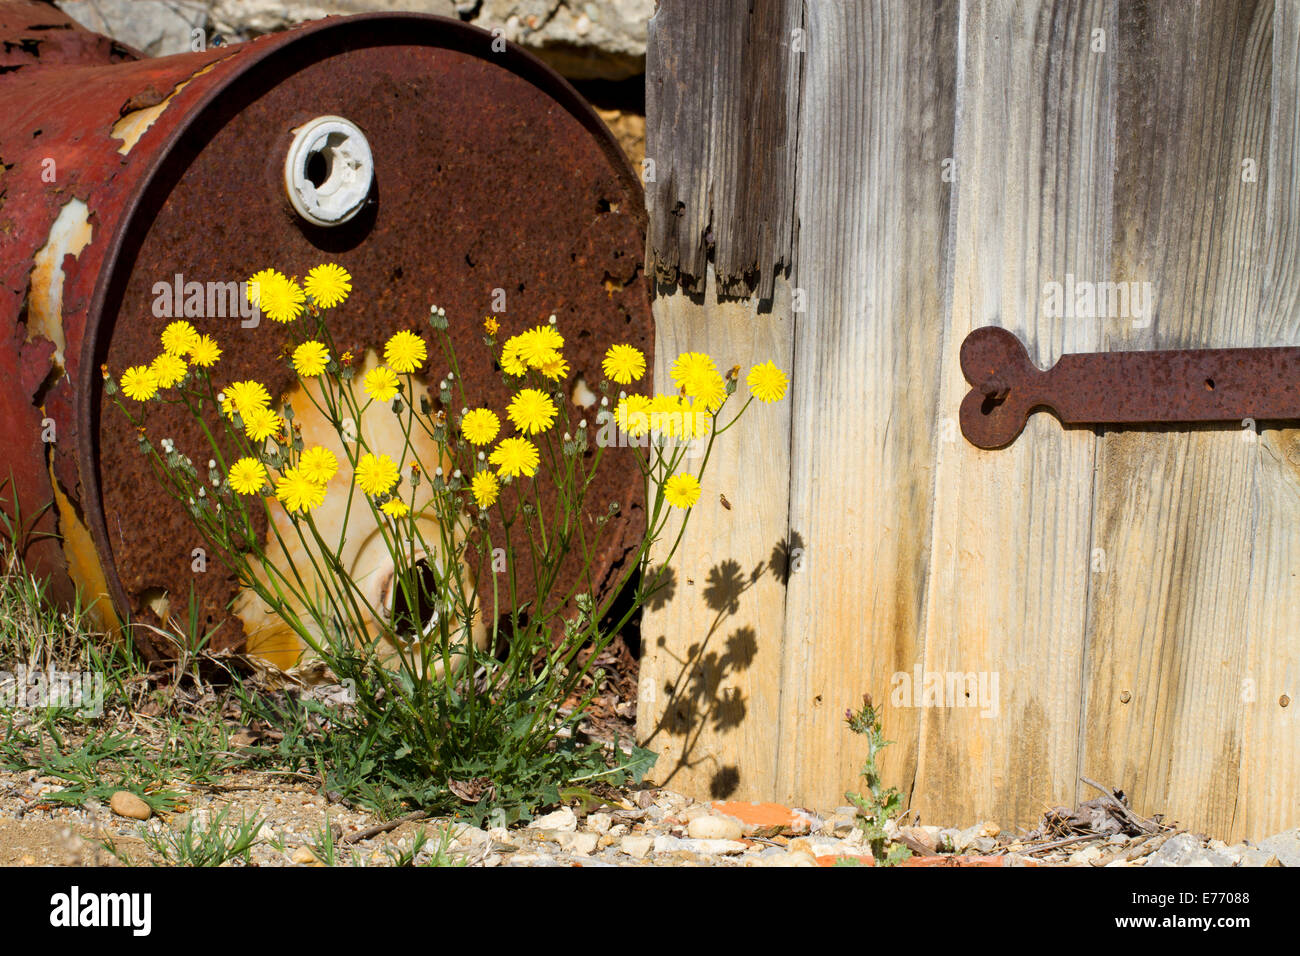 French Hawksbeard (Crepis nicaeensis) flowering next to an old door and rusty barrel at the edge of a vineyard. Stock Photo